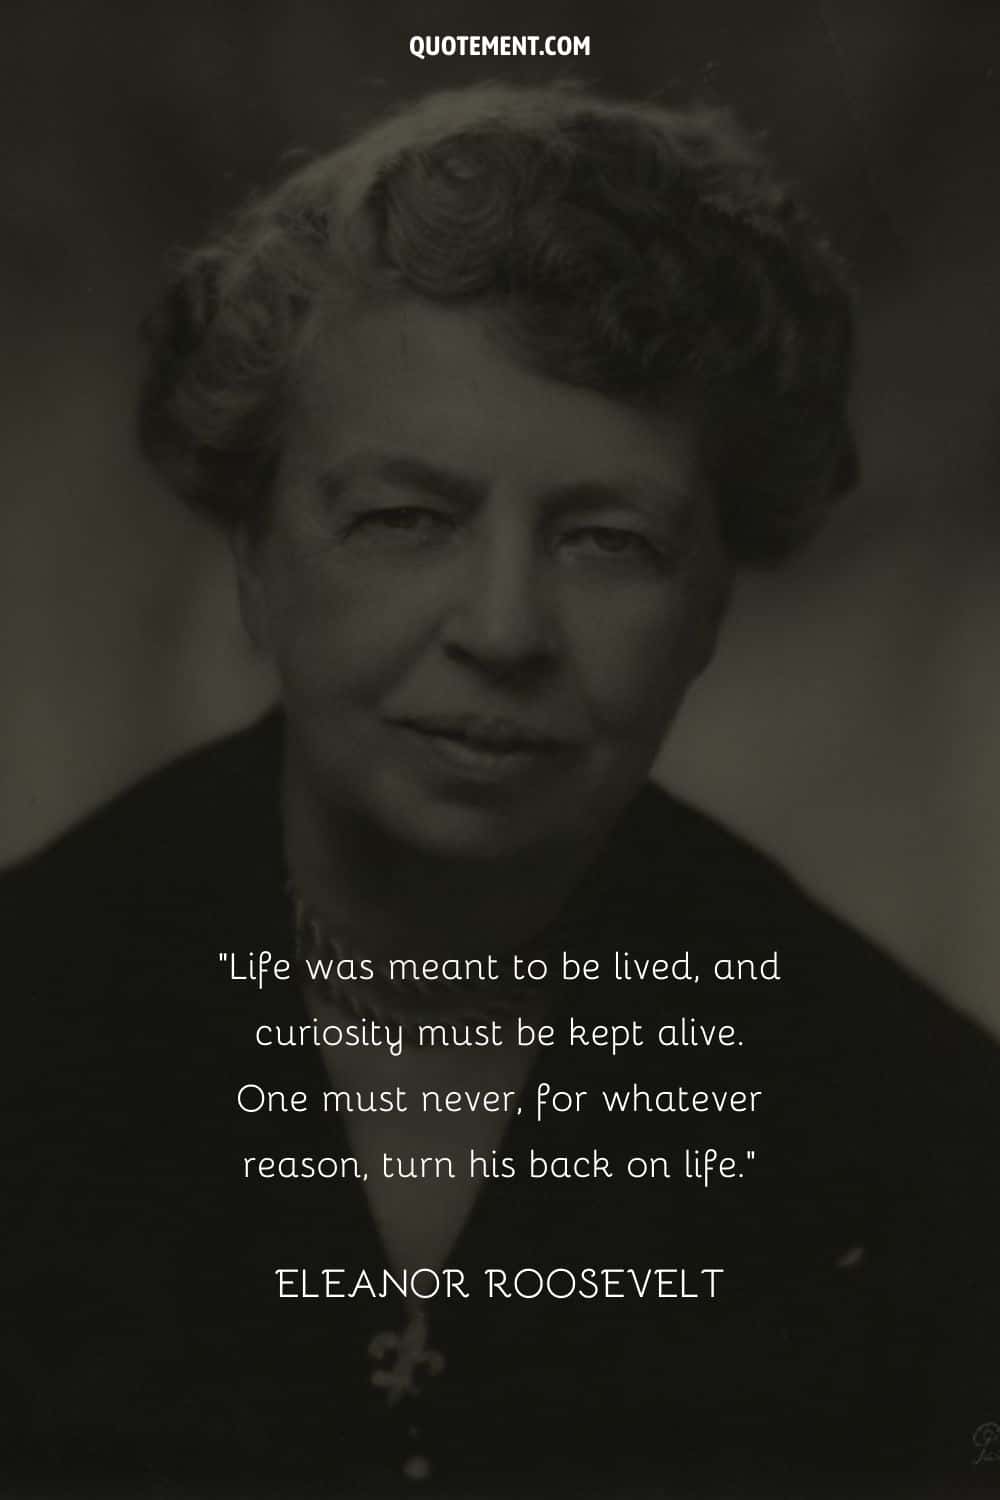 “Life was meant to be lived, and curiosity must be kept alive. One must never, for whatever reason, turn his back on life.” — Eleanor Roosevelt